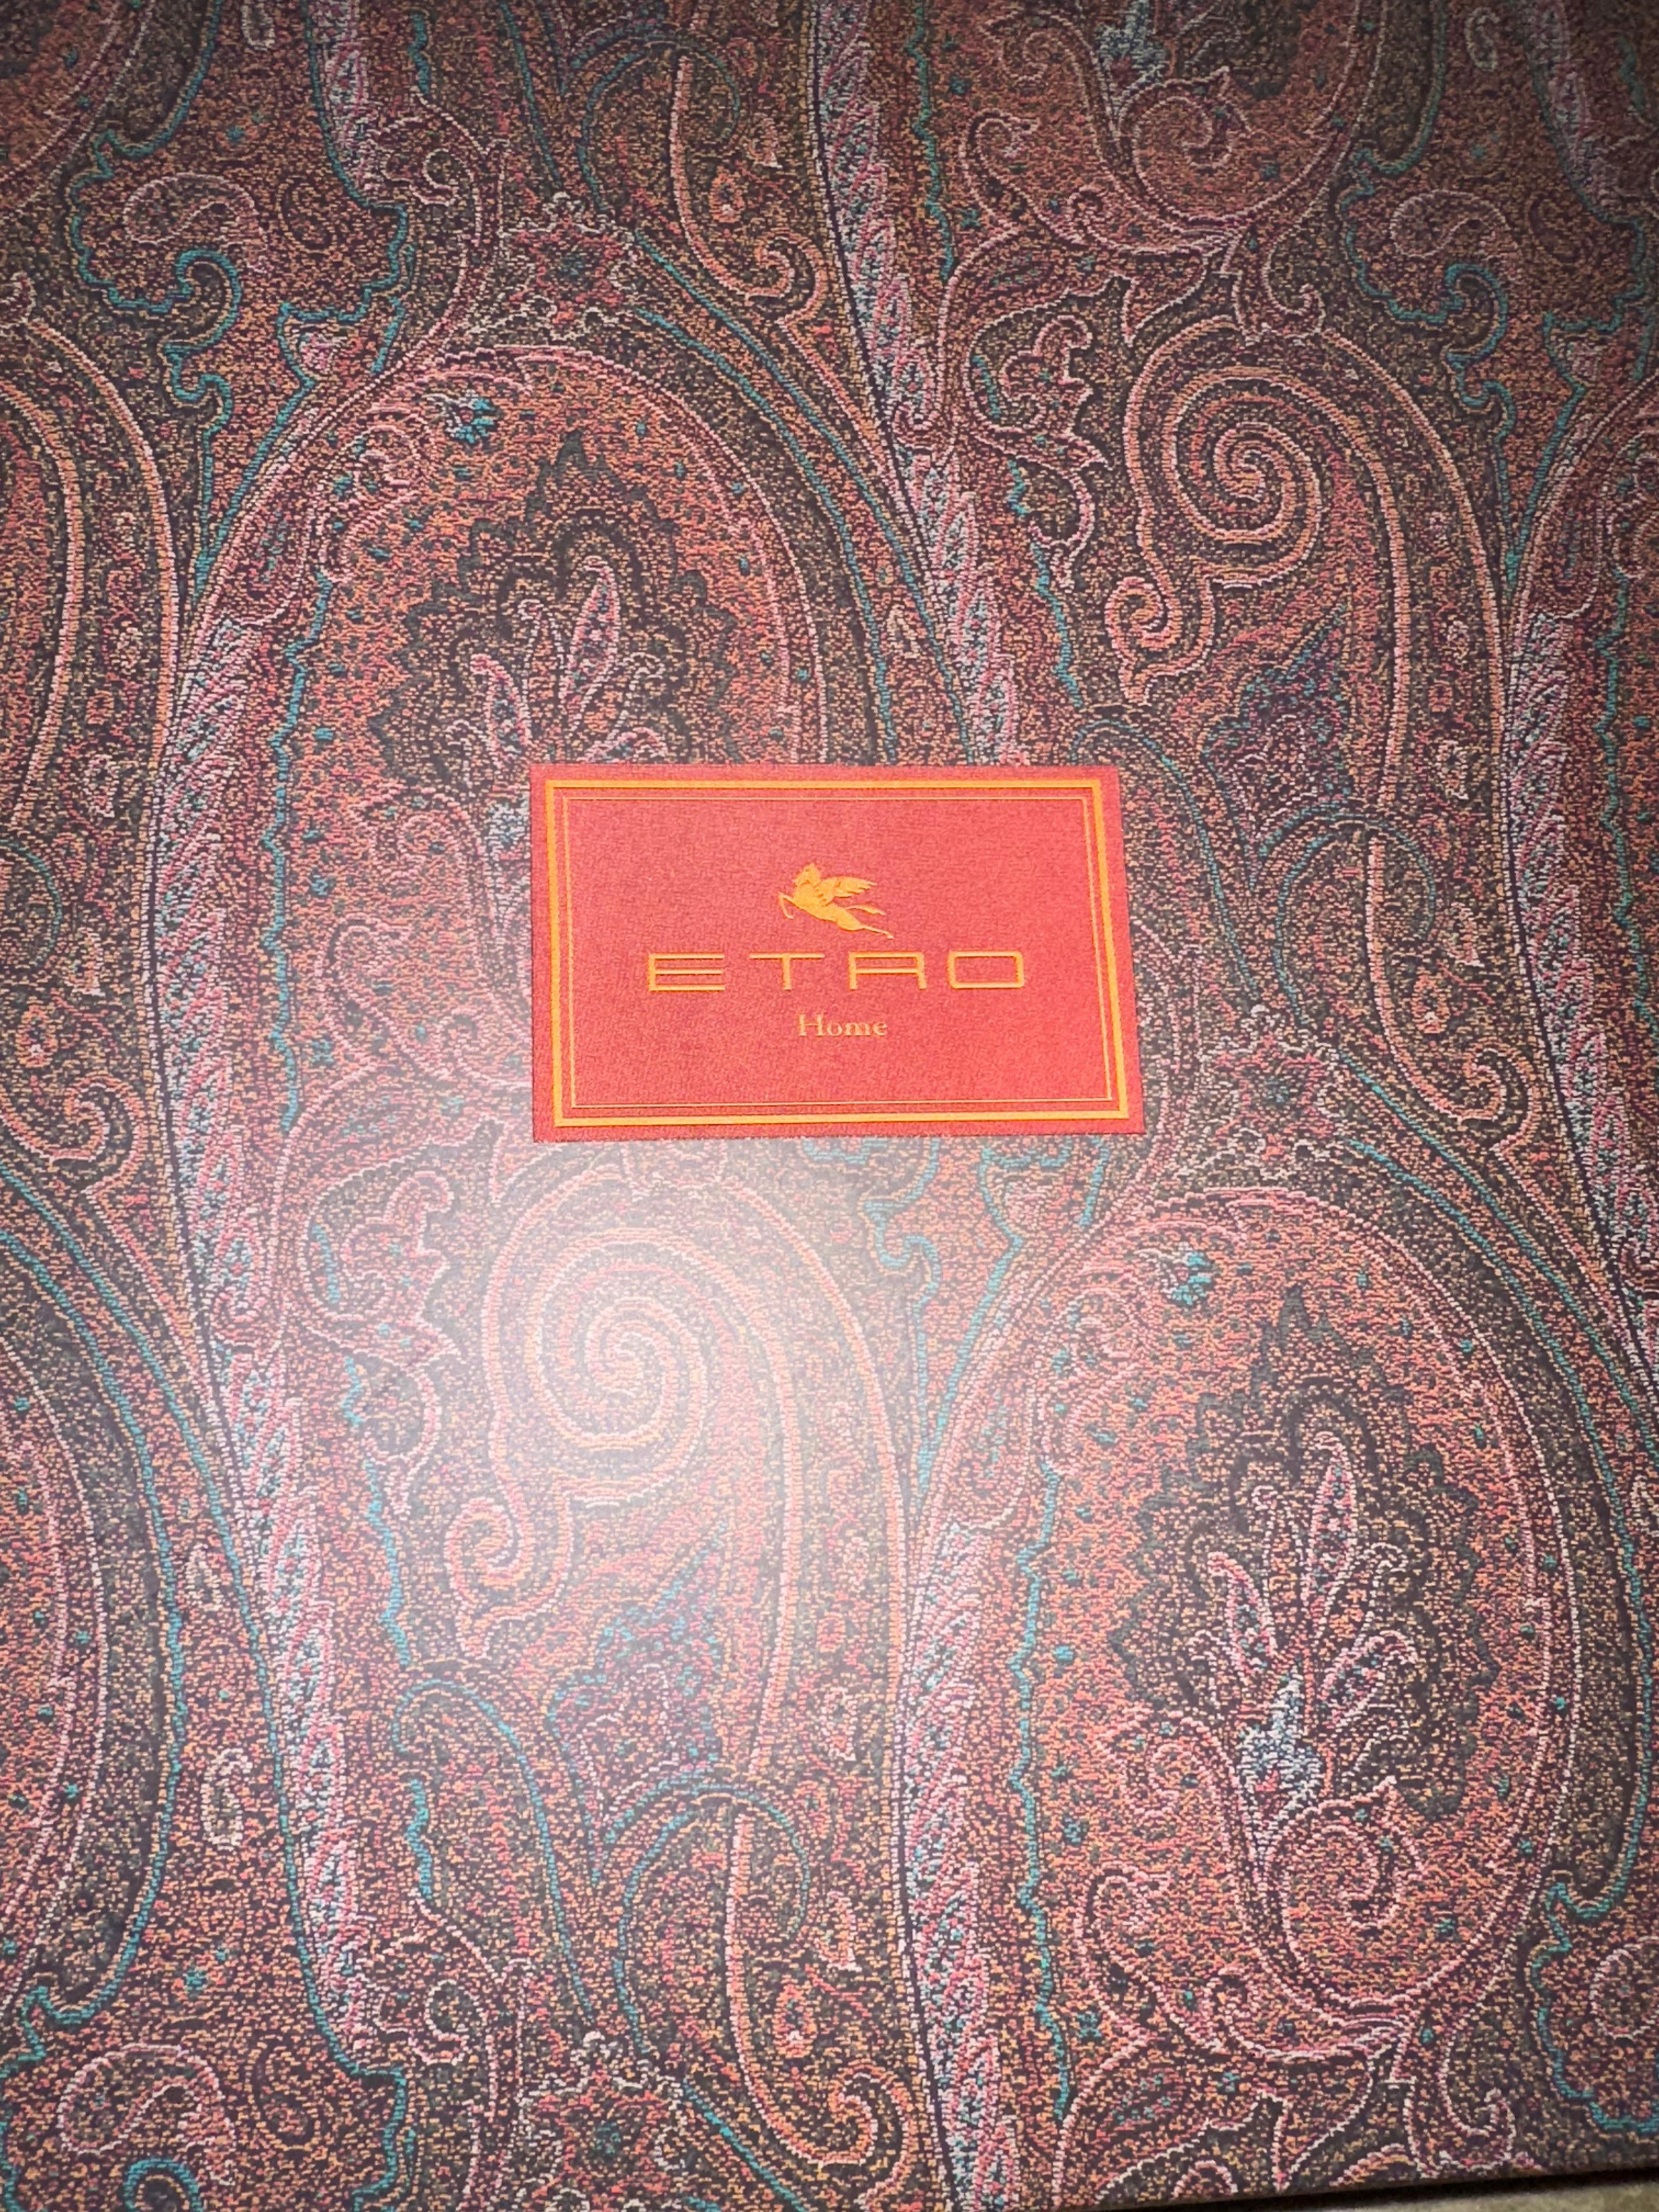 Etro Bani Silk Throw, Deep Red, New in Box, Italy  In New Condition For Sale In Brooklyn, NY